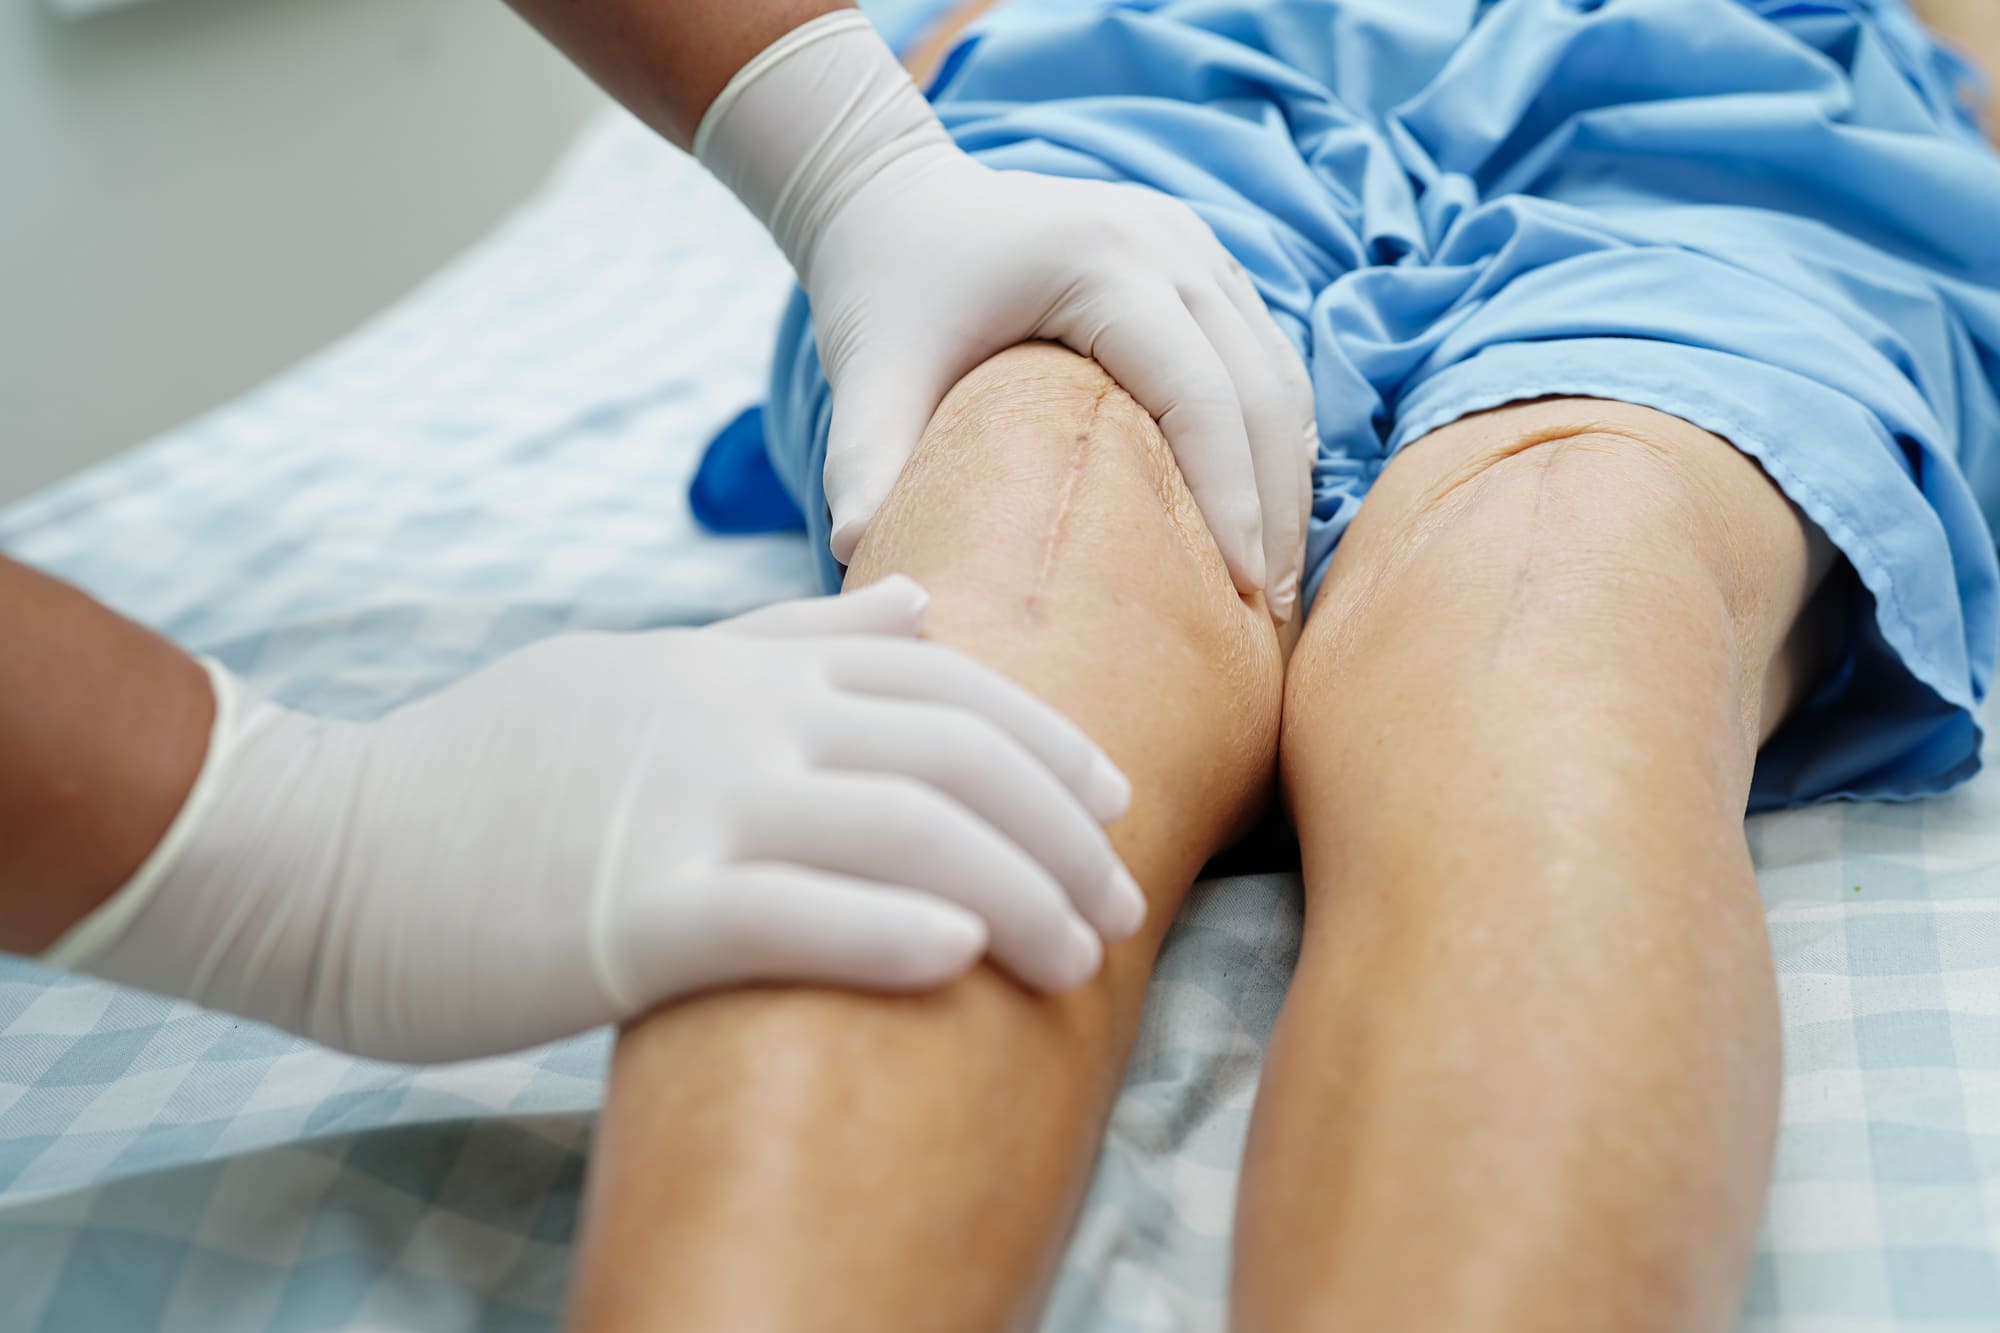 Knee Replacement Surgery - After Work-related Injury (1)